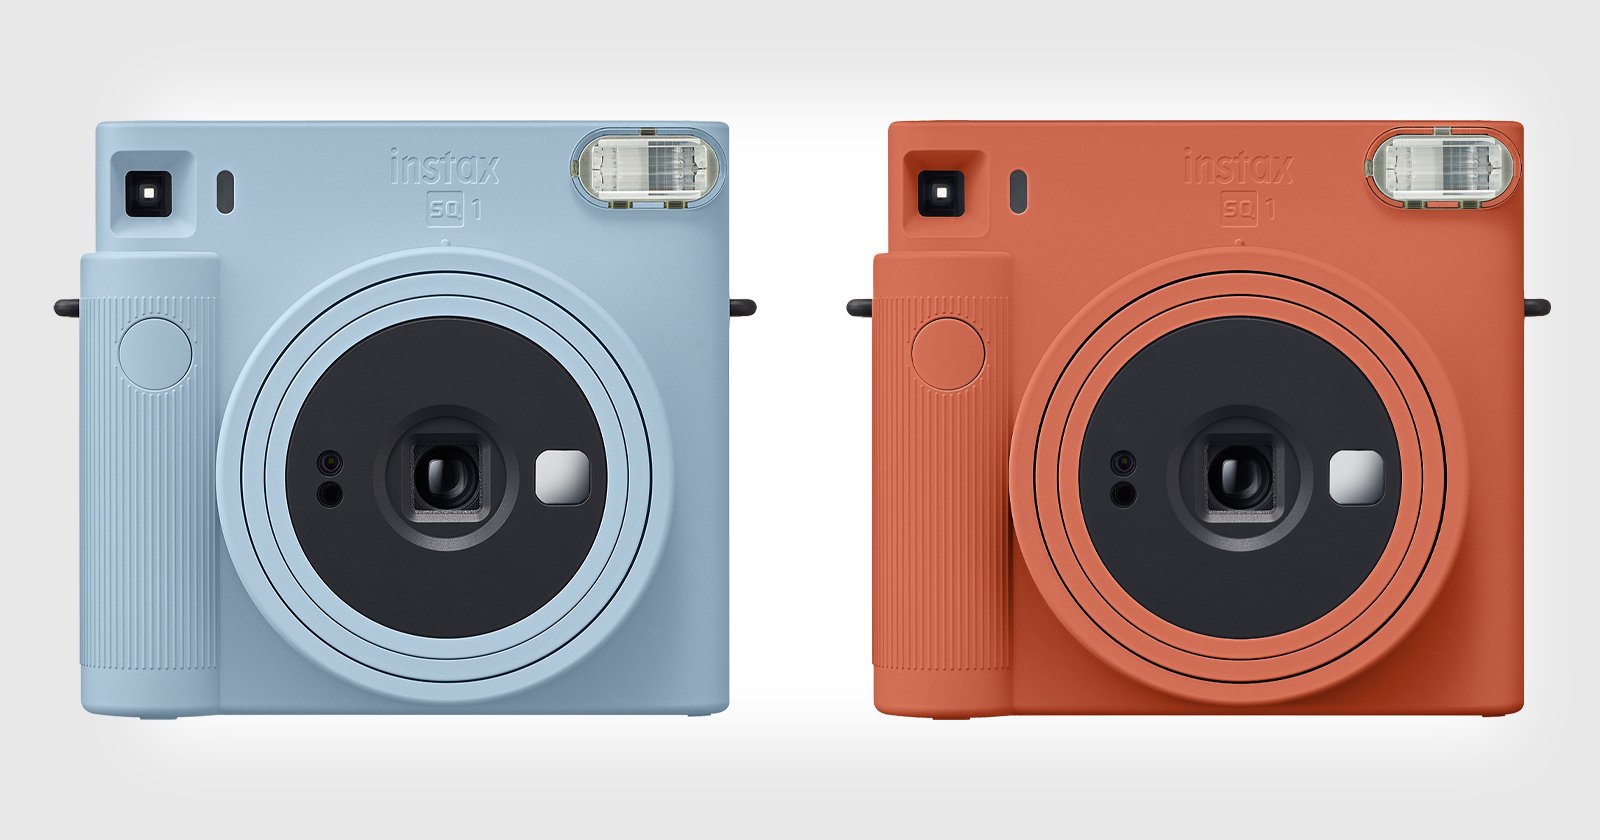 Fujifilm Instax Square SQ1 Instant Camera - Buy, Rent, Pay in